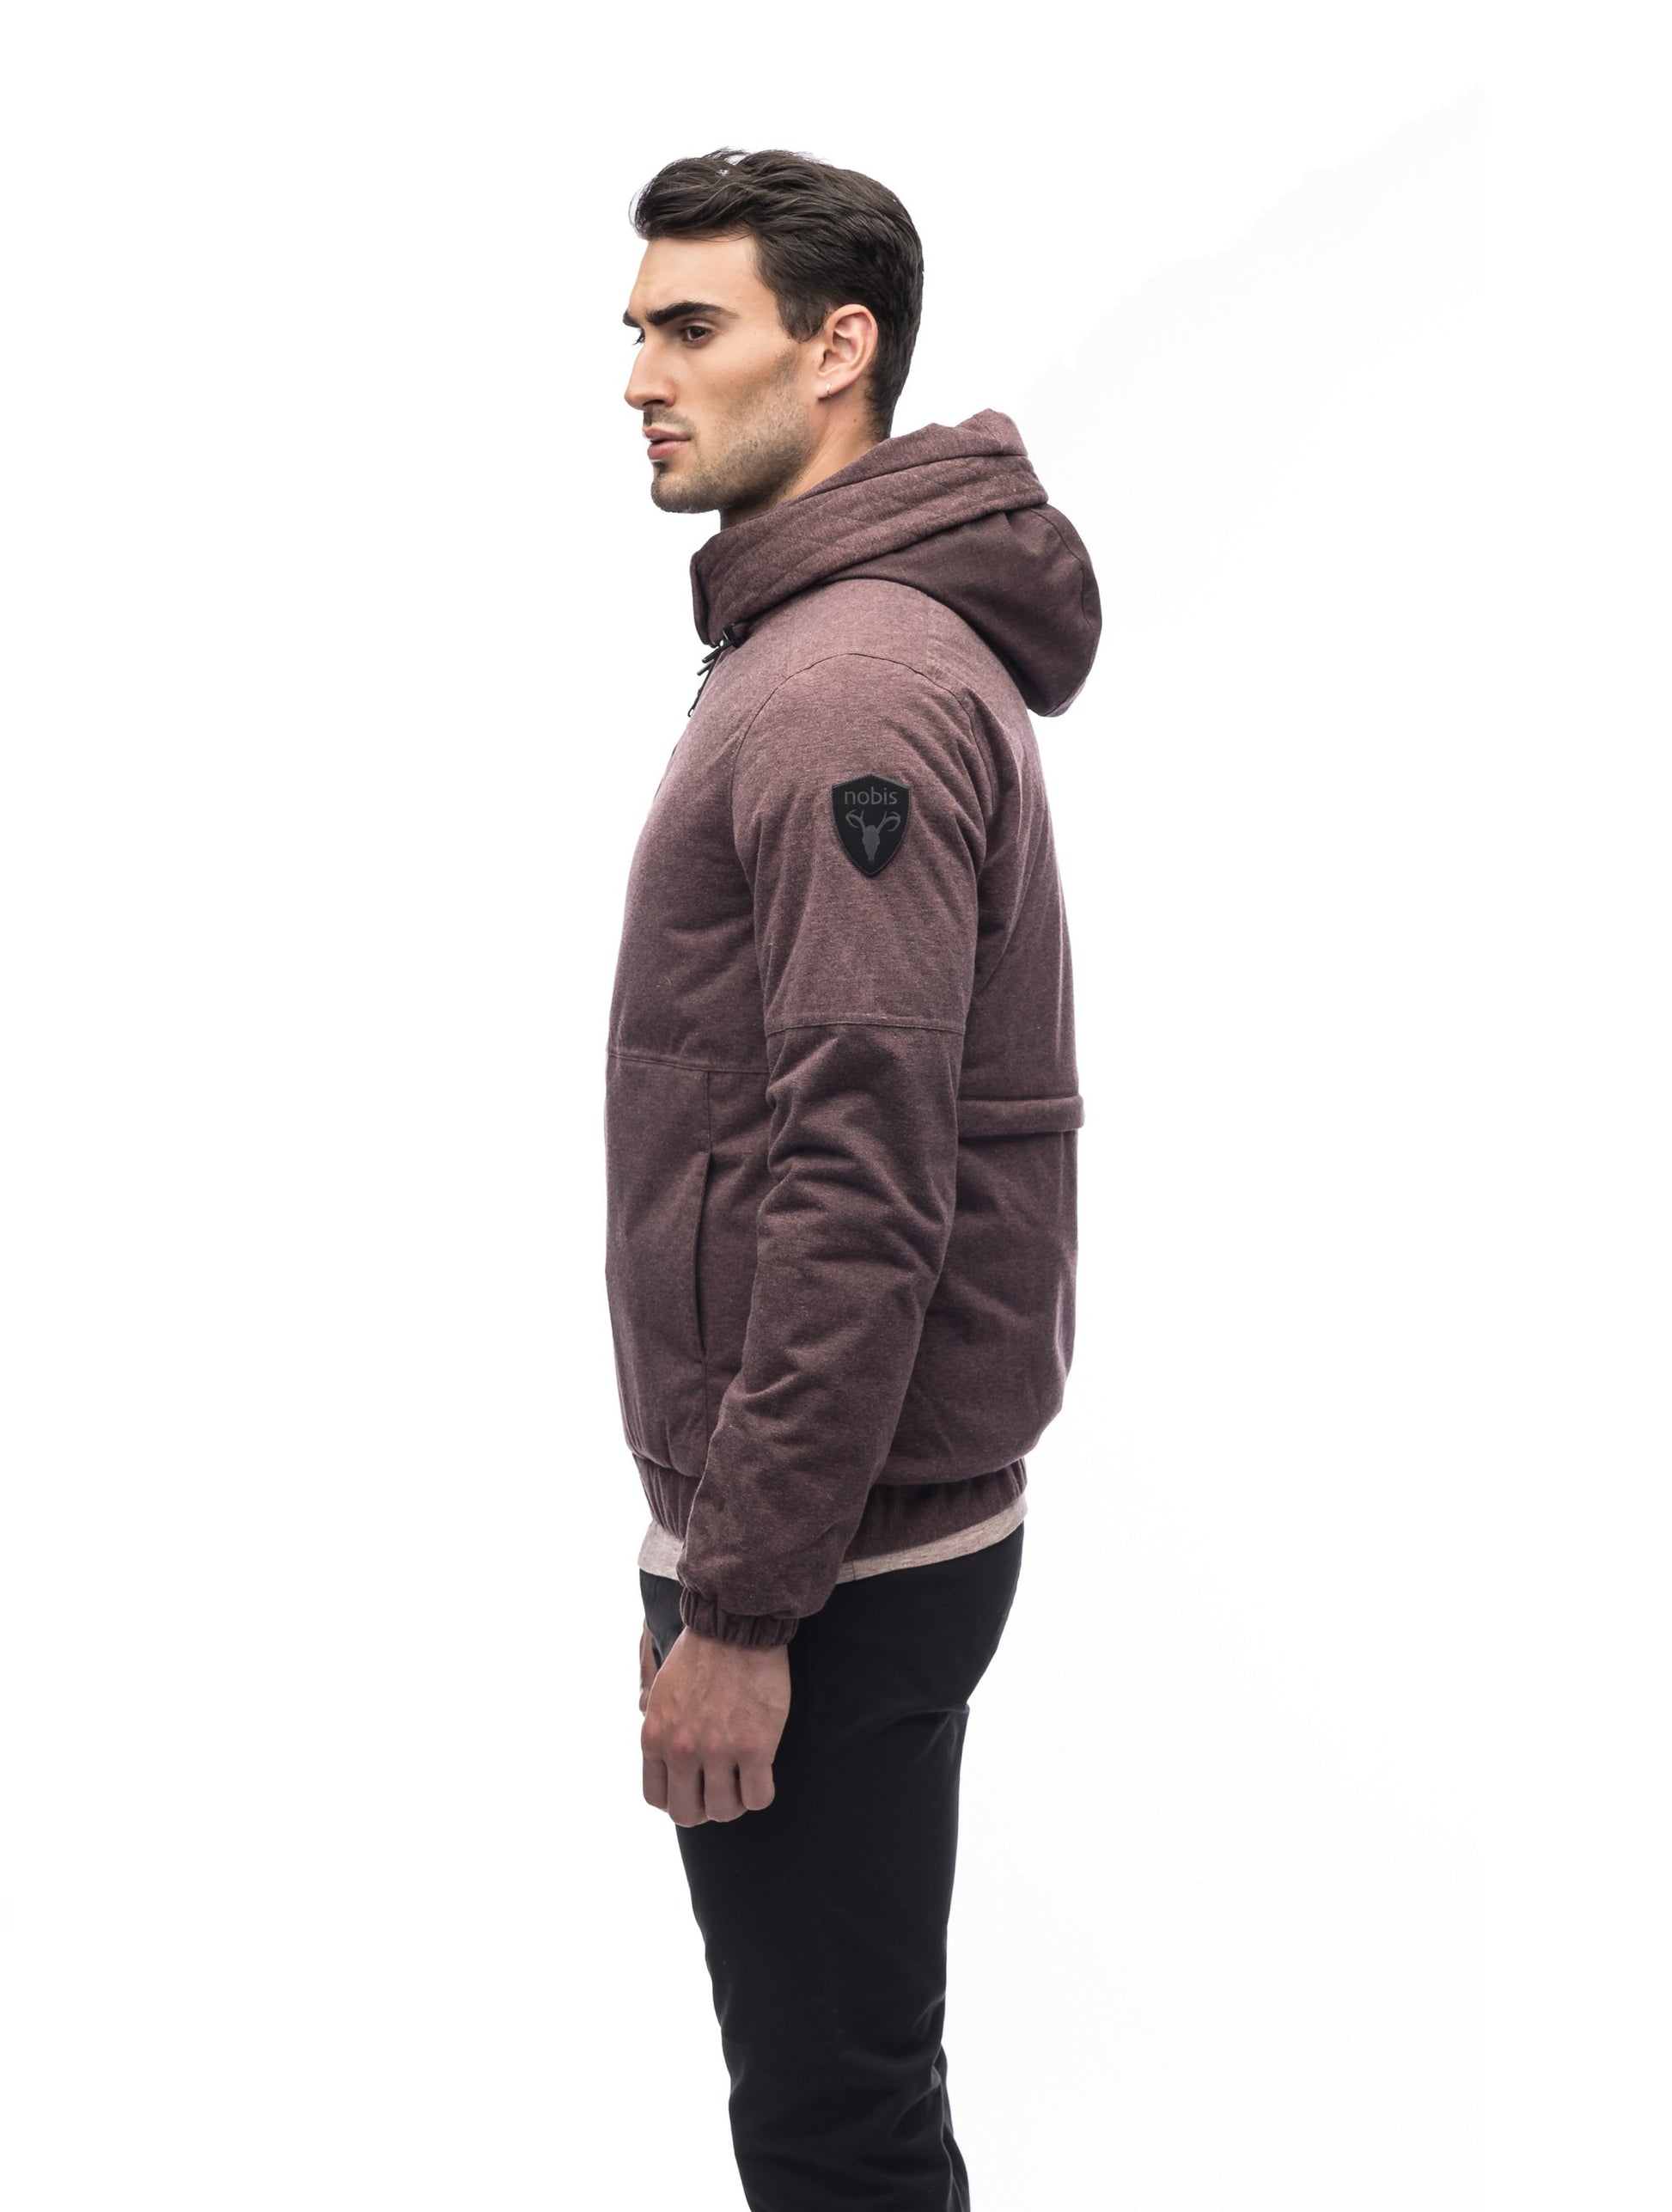 Men's lightweight down filled jersey hoodie that's windproof, waterproof and breathable in Maroon